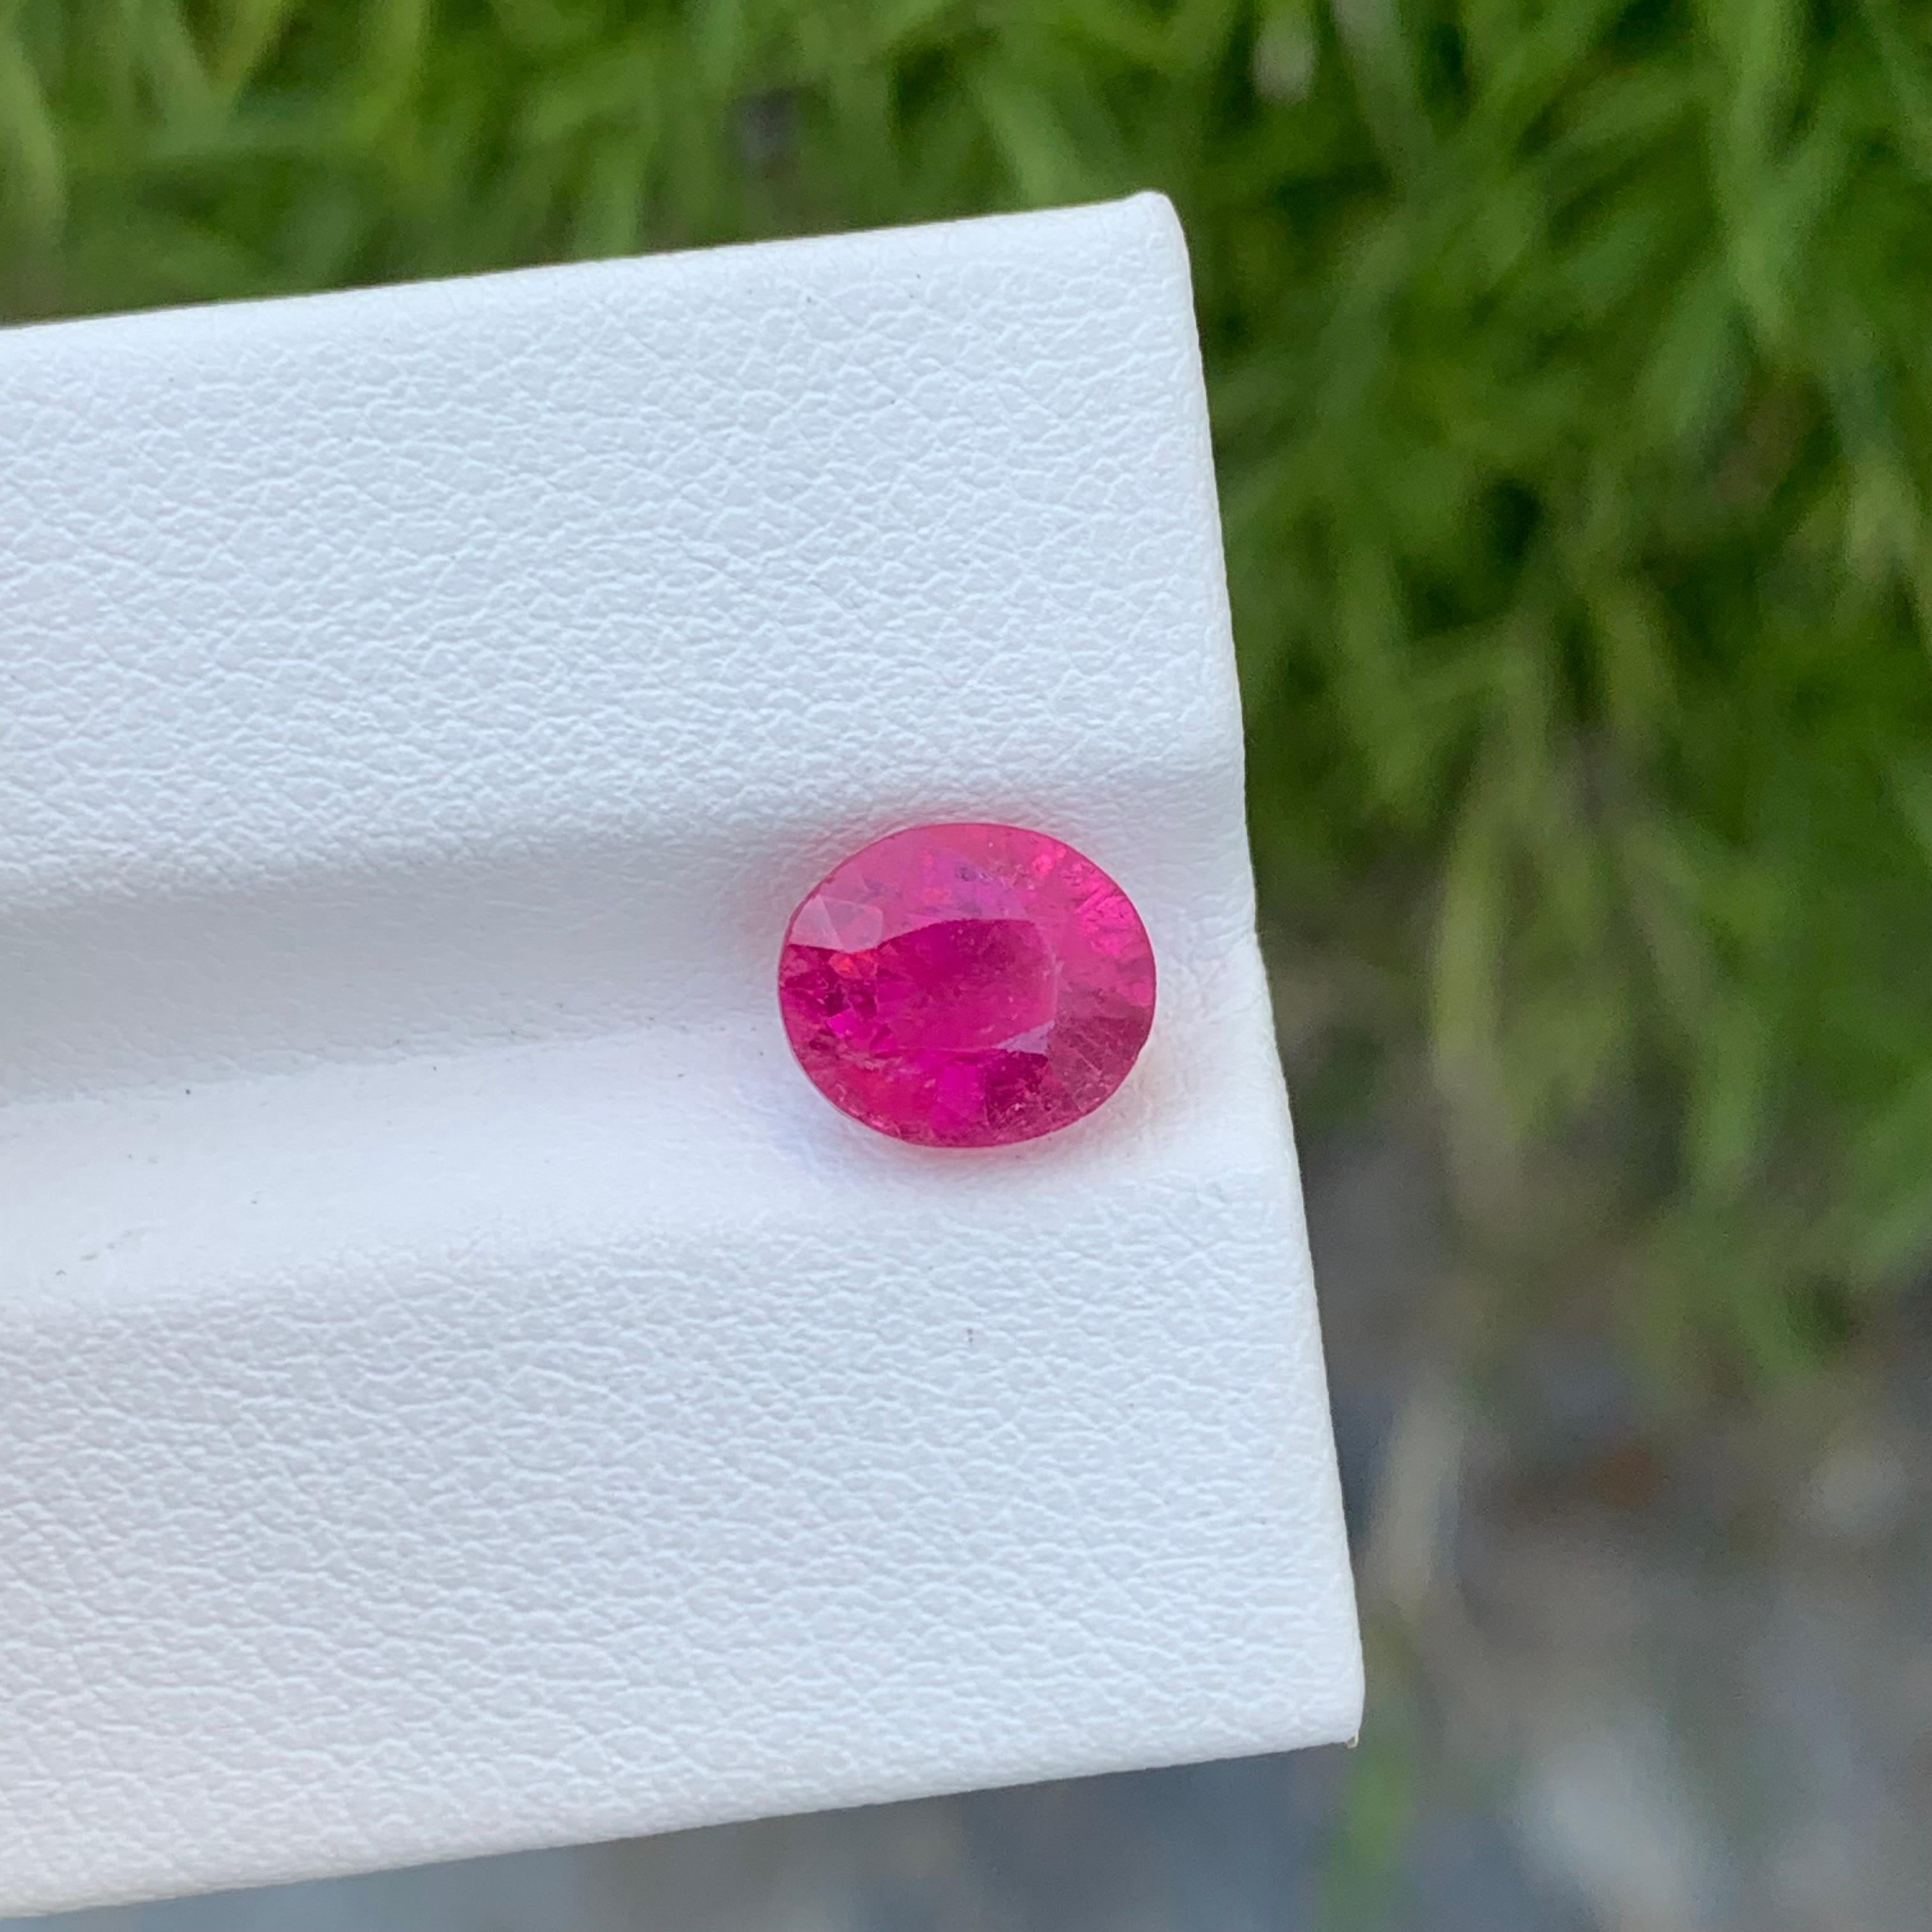 Loose Rubellite Tourmaline

Weight: 2.50 Carats
Dimension: 8.2 x 7.1 x 5.8 Mm
Origin: Afghanistan
Shape: Oval 
Color: Pink 
Certificate: On Demand

Rubellite tourmaline, often regarded as the 